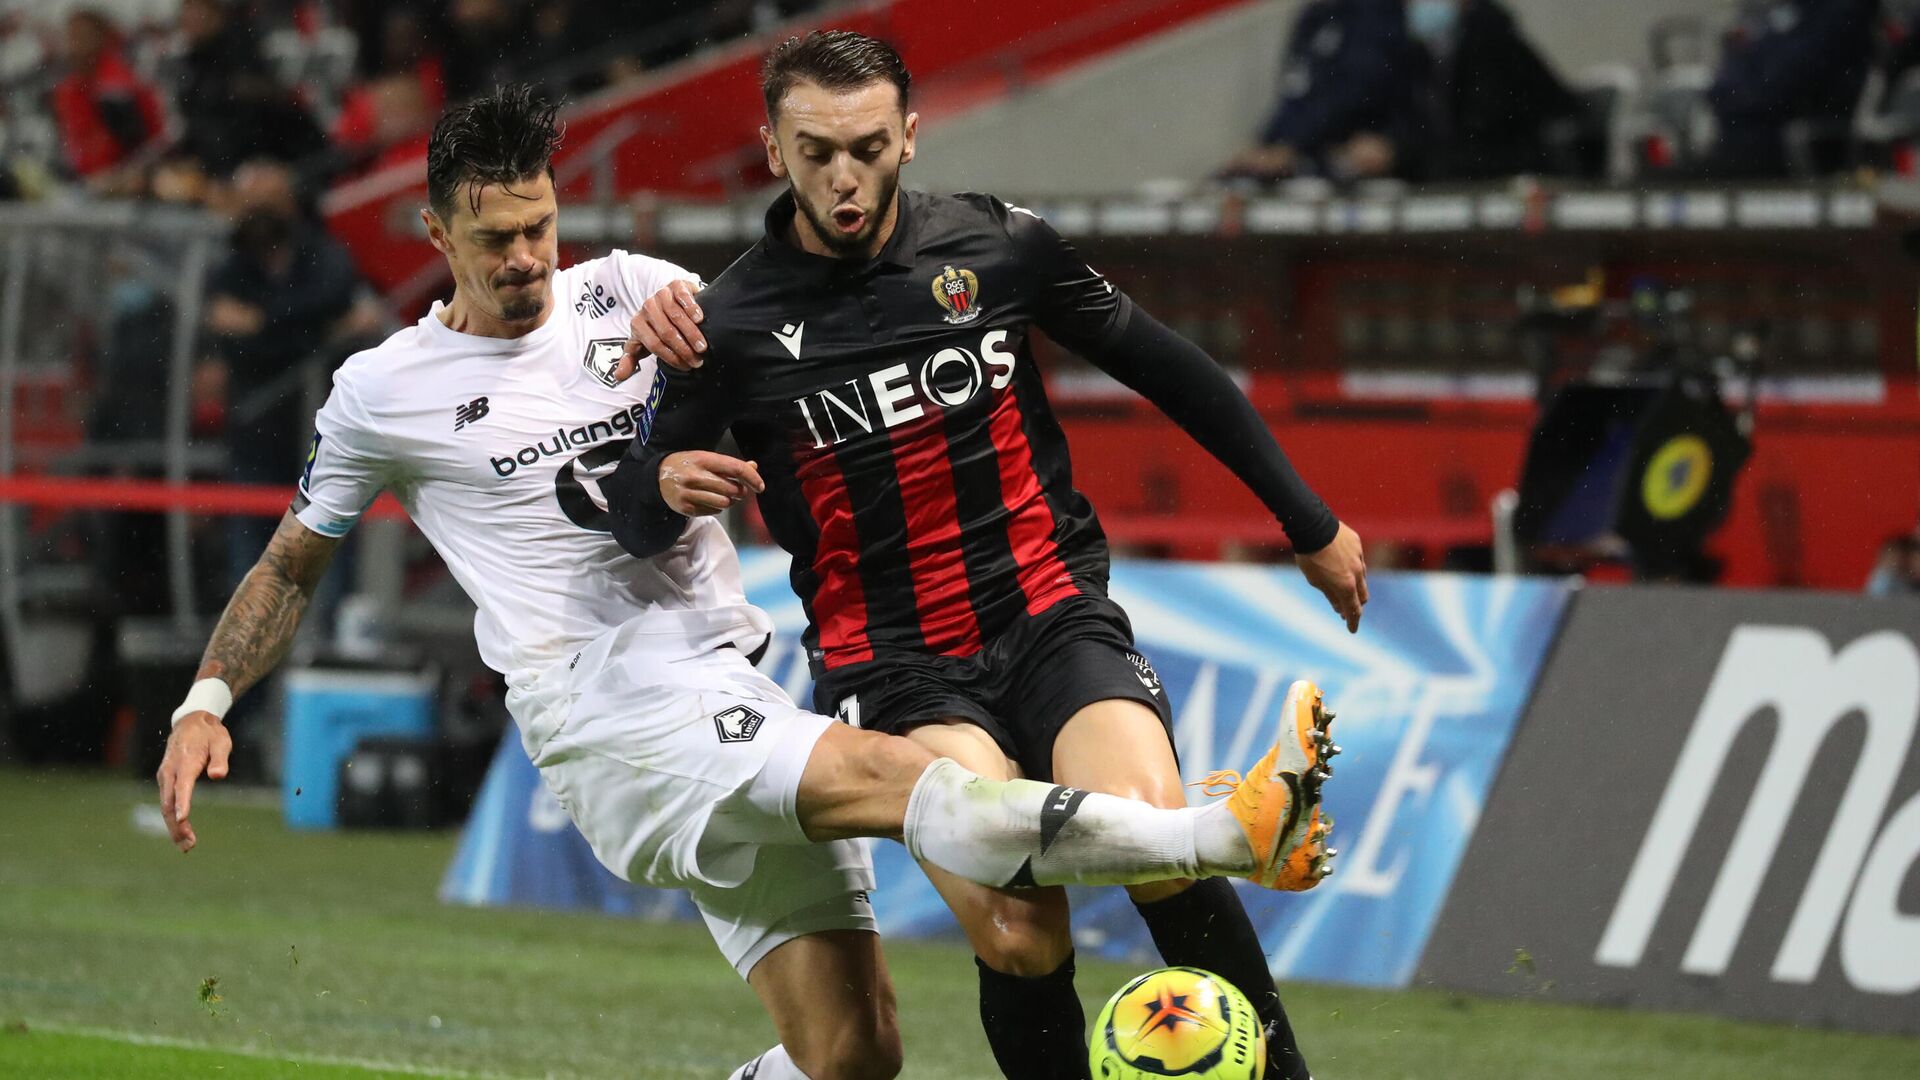 Nice's French forward Amine Gouiri fights for the ball with Lille's Portuguese defender Jose Da Rocha during the French L1 football match Nice vs Lille at the Allianz Riviera stadium in Nice, on October 25, 2020. - Nice's Amine Gouiri (R) vies with Lille's Jose Da Rocha (L) (Photo by Valery HACHE / AFP) - РИА Новости, 1920, 25.10.2020